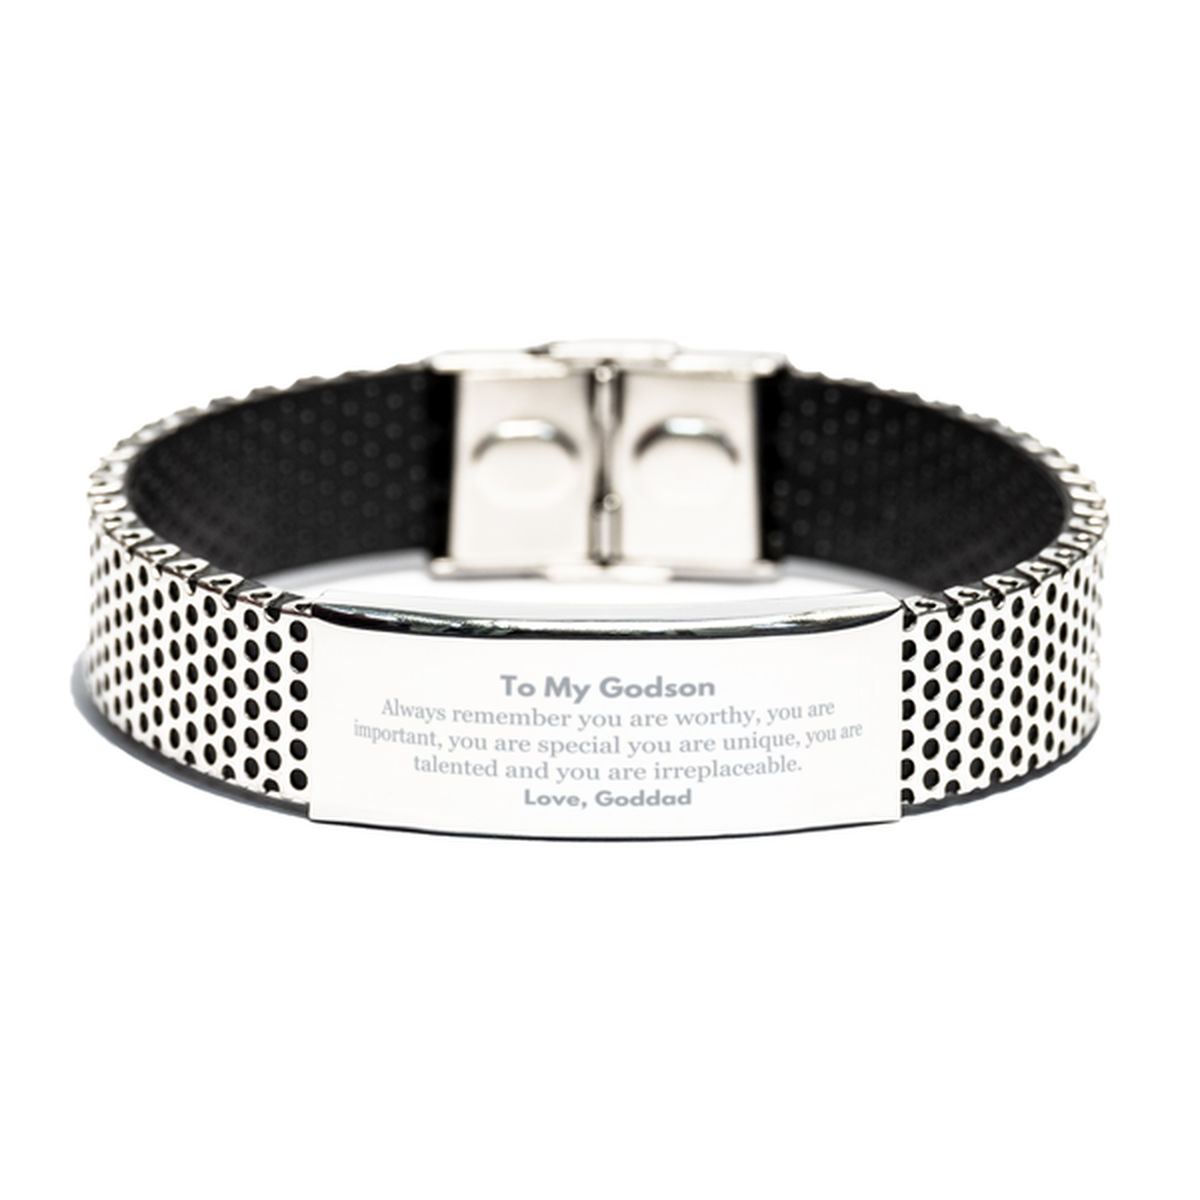 Godson Birthday Gifts from Goddad, Inspirational Stainless Steel Bracelet for Godson Christmas Graduation Gifts for Godson Always remember you are worthy, you are important. Love, Goddad